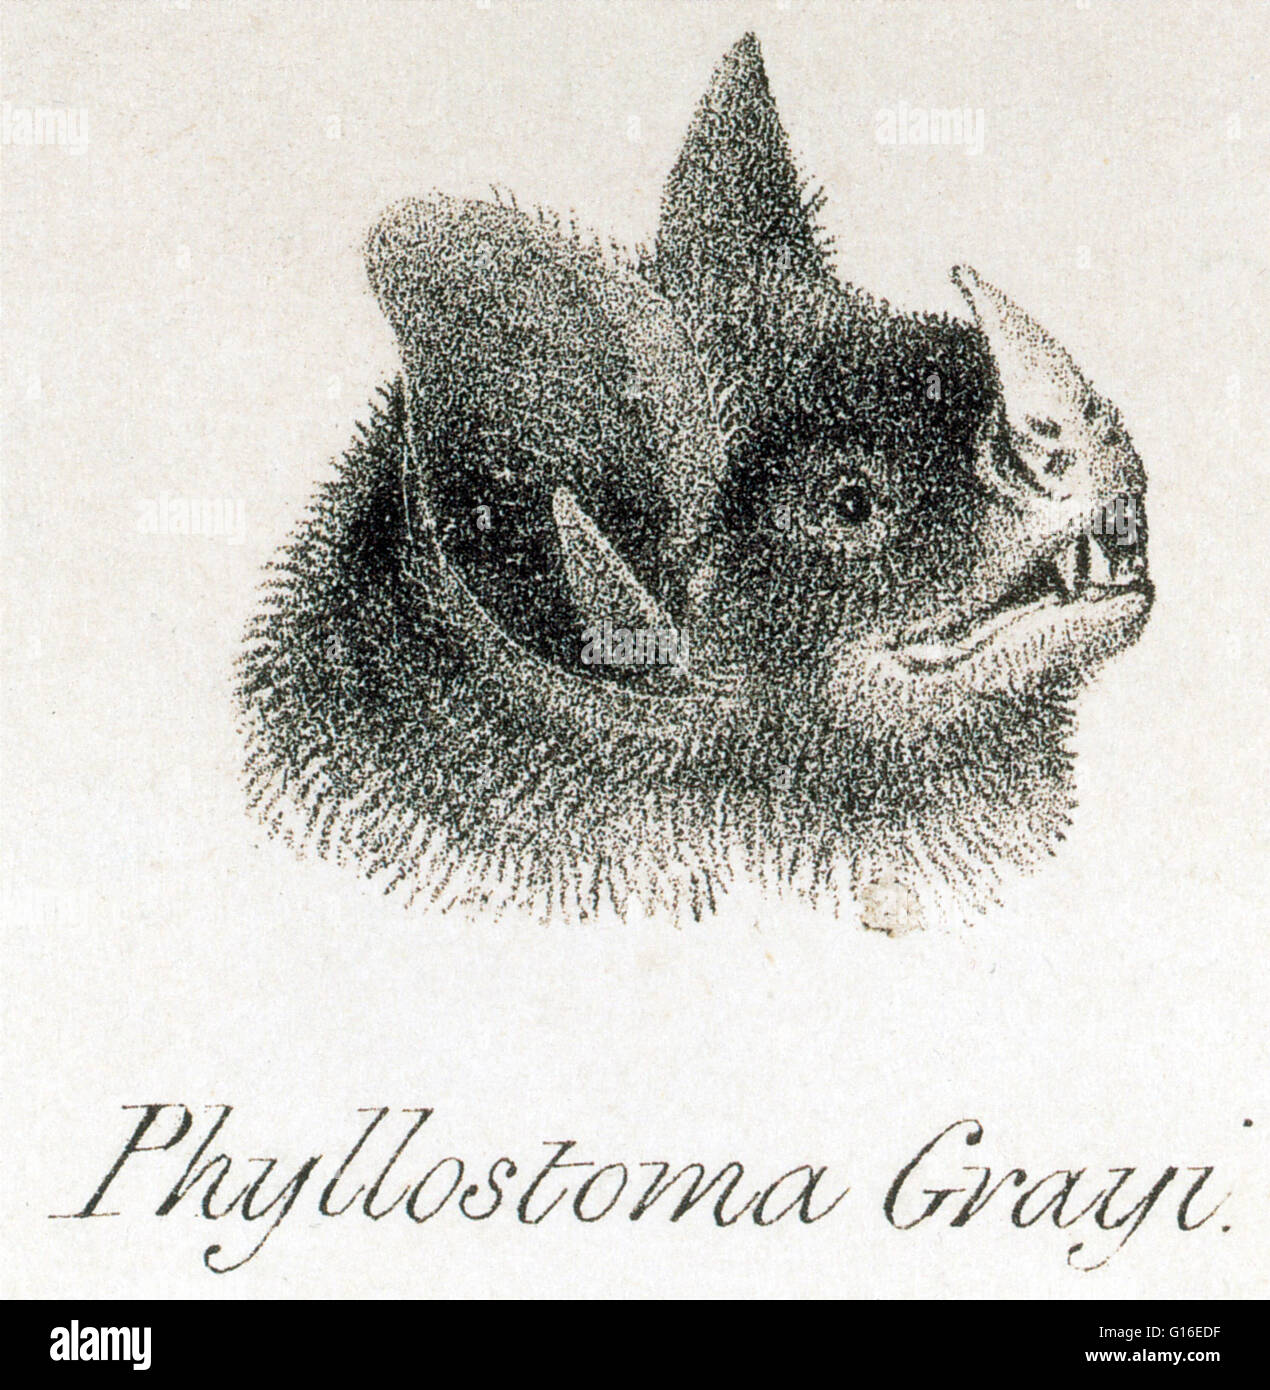 Head of Phyllostoma grayi from Darwin's zoology of the voyage of H.M.S. Beagle. Phyllostoma is a South American genus of phyllostomine bats from which the subfamily and the family each takes its name. Bats are mammals of the order Chiroptera whose forelim Stock Photo